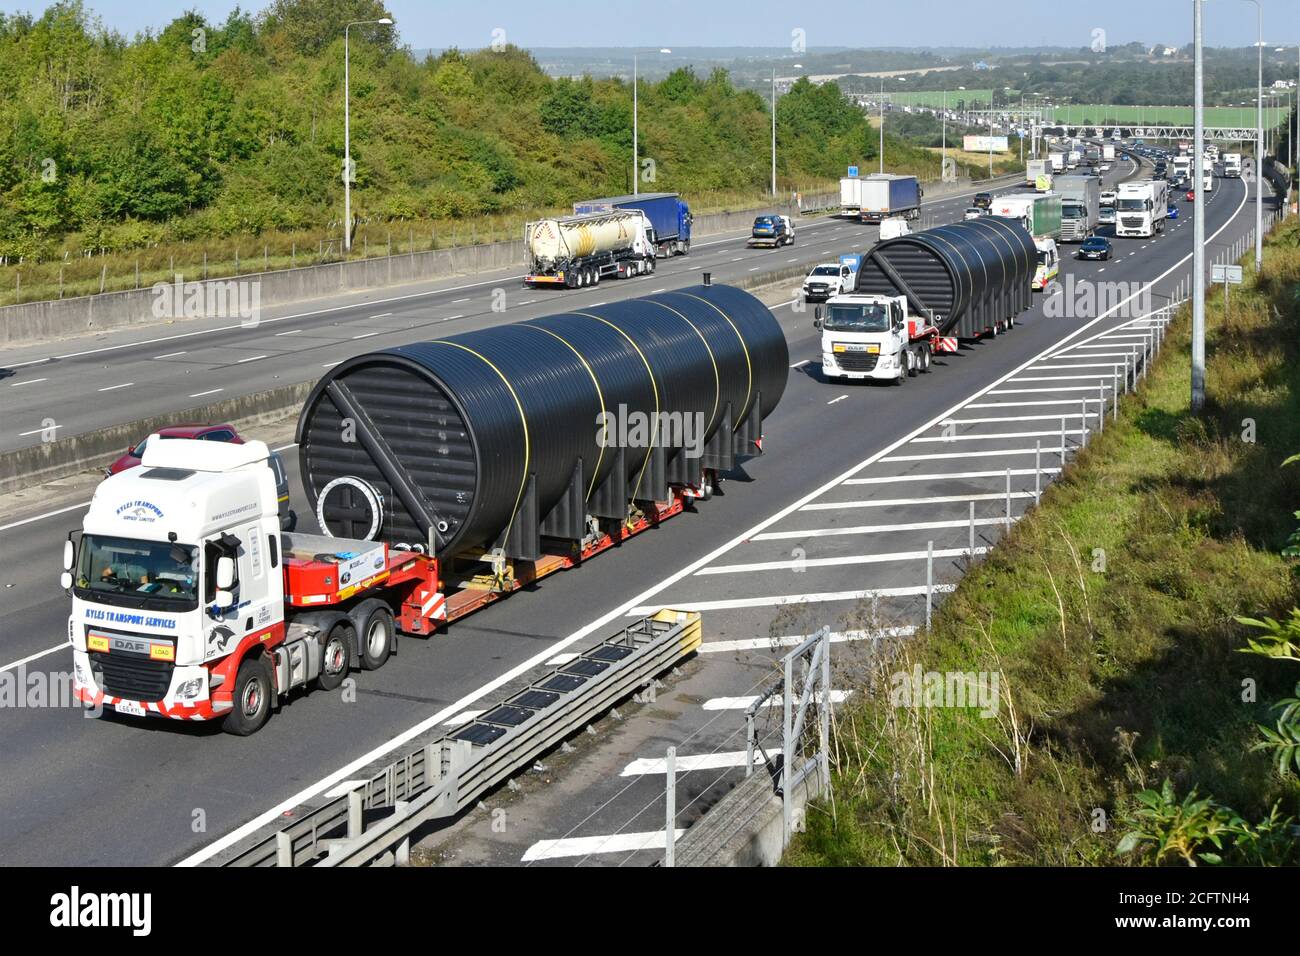 Wide oversize long cylinder shape load on lorry truck low loader occupying two lanes of M25 motorway with escort van at back with traffic queue UK Stock Photo